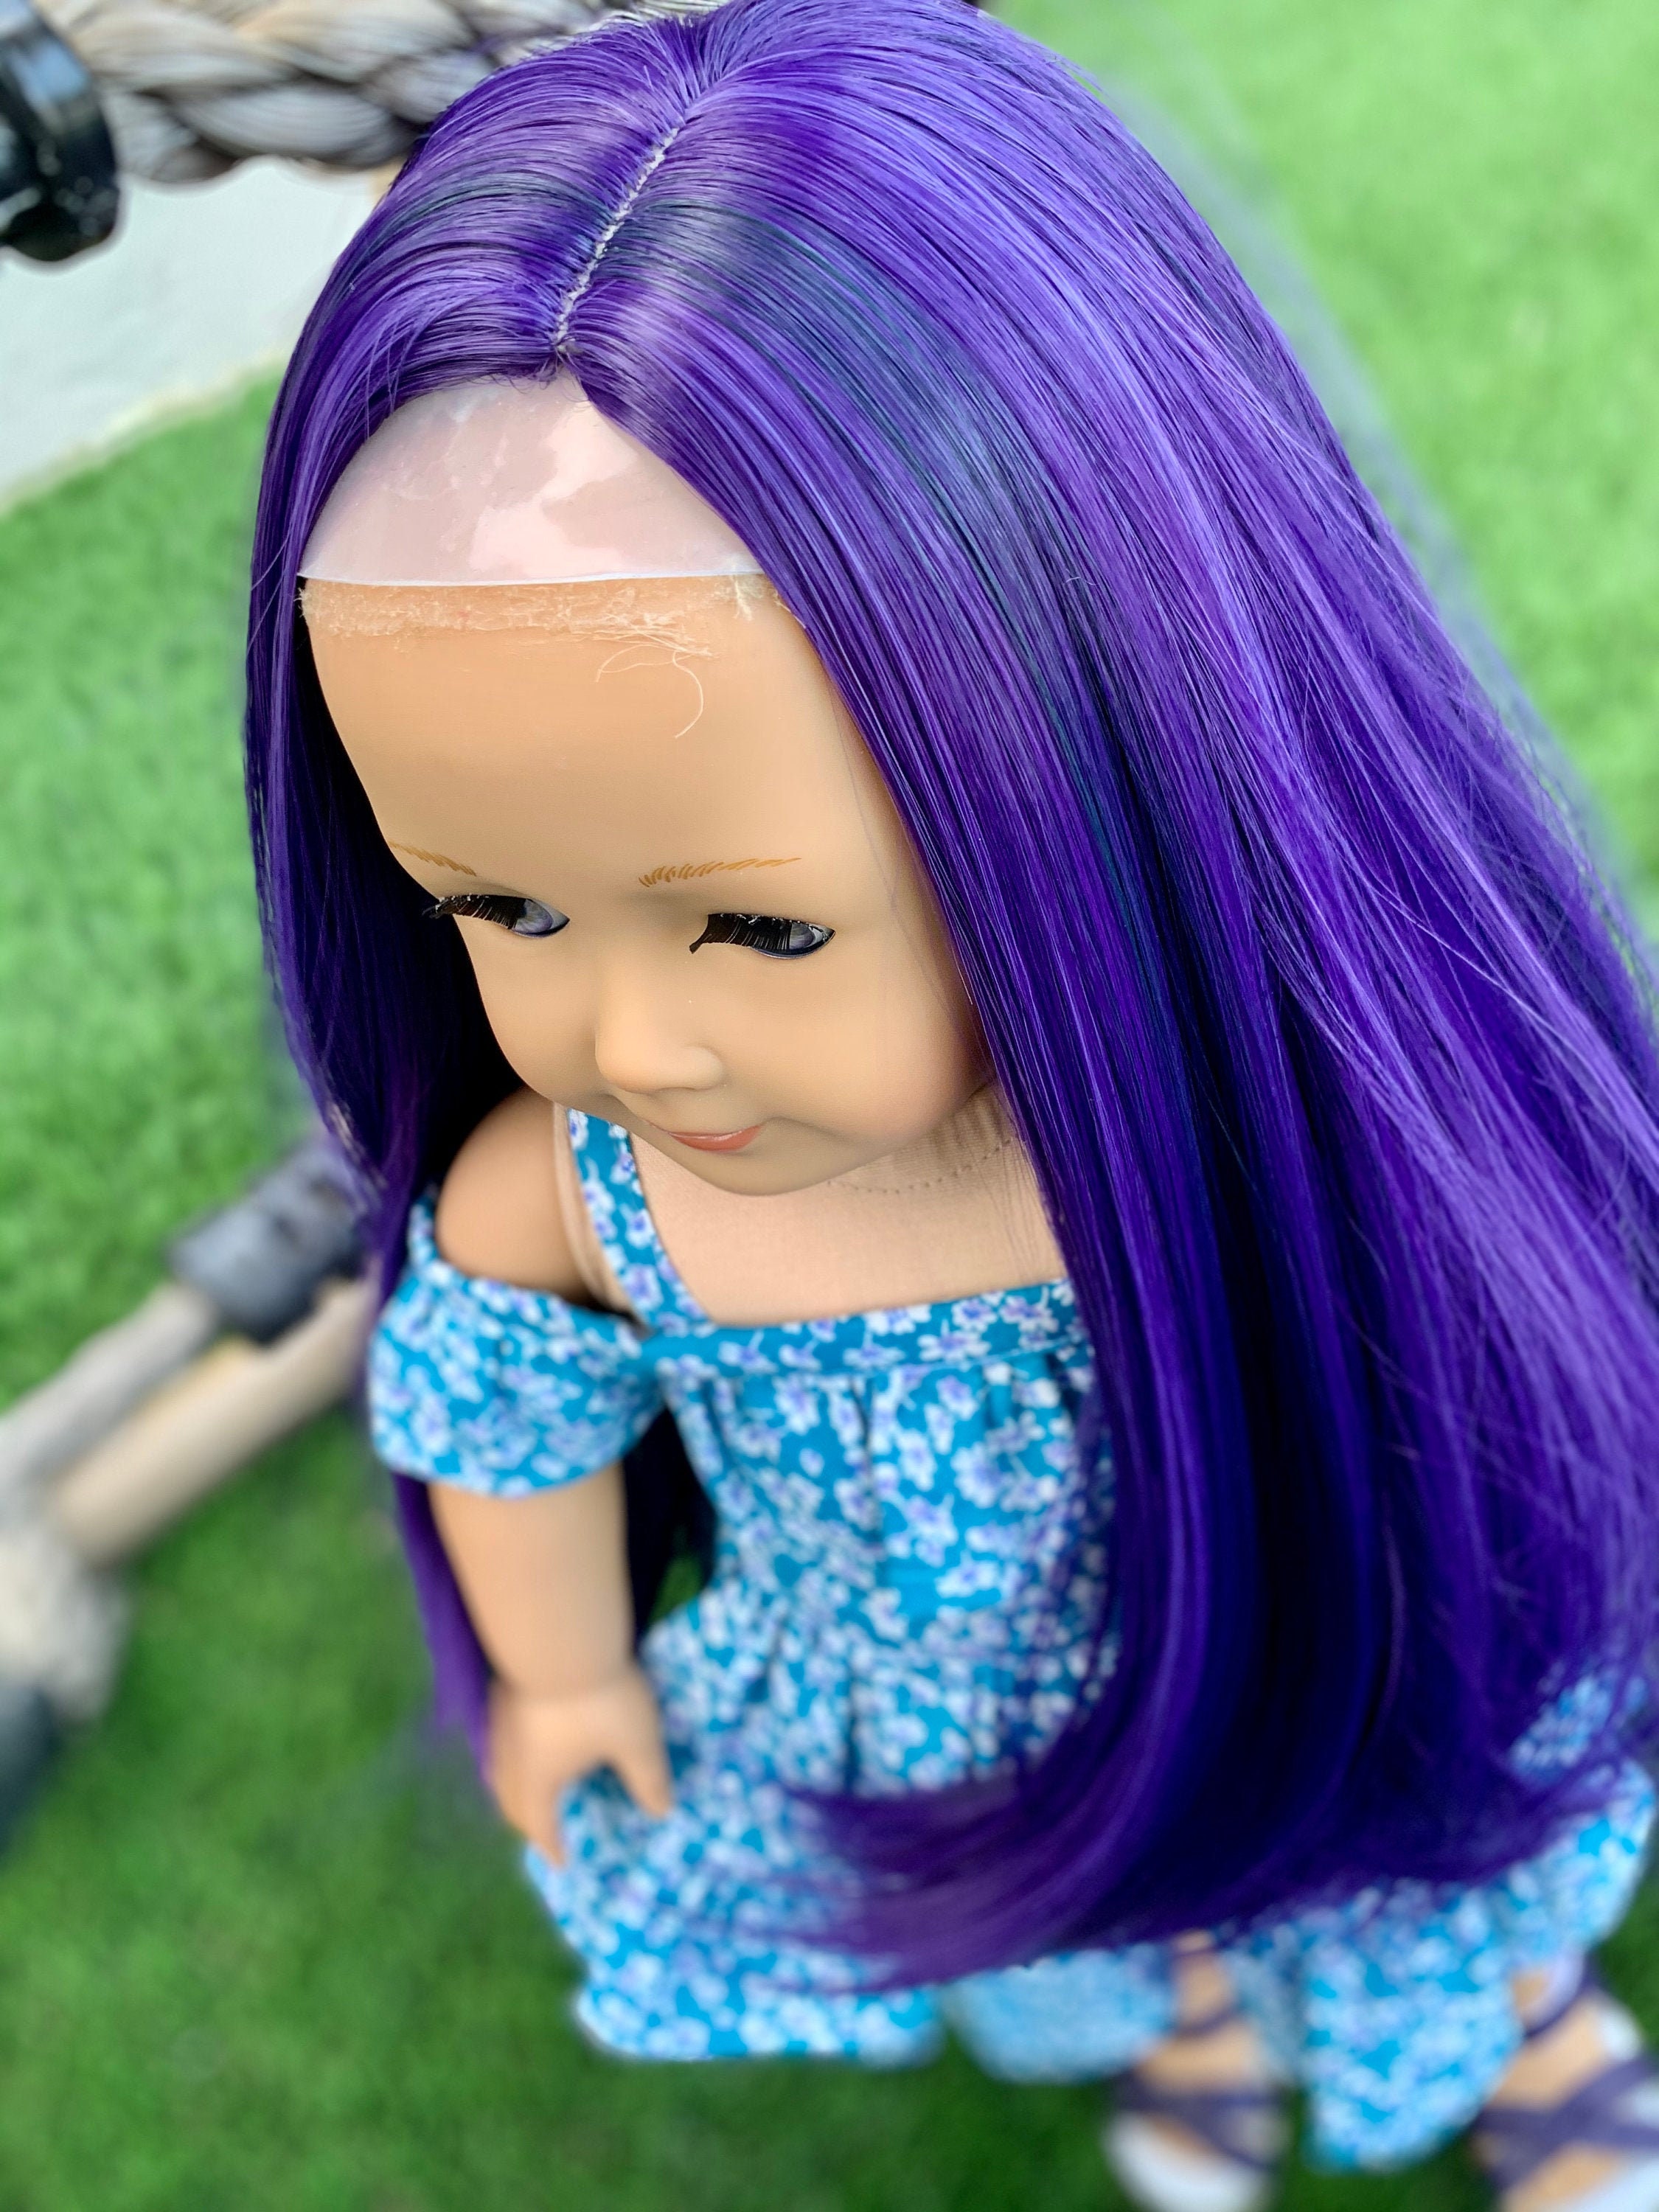 Exquisite Doll Designs Custom Doll Wigs - American Girl Size Wigs 10-11